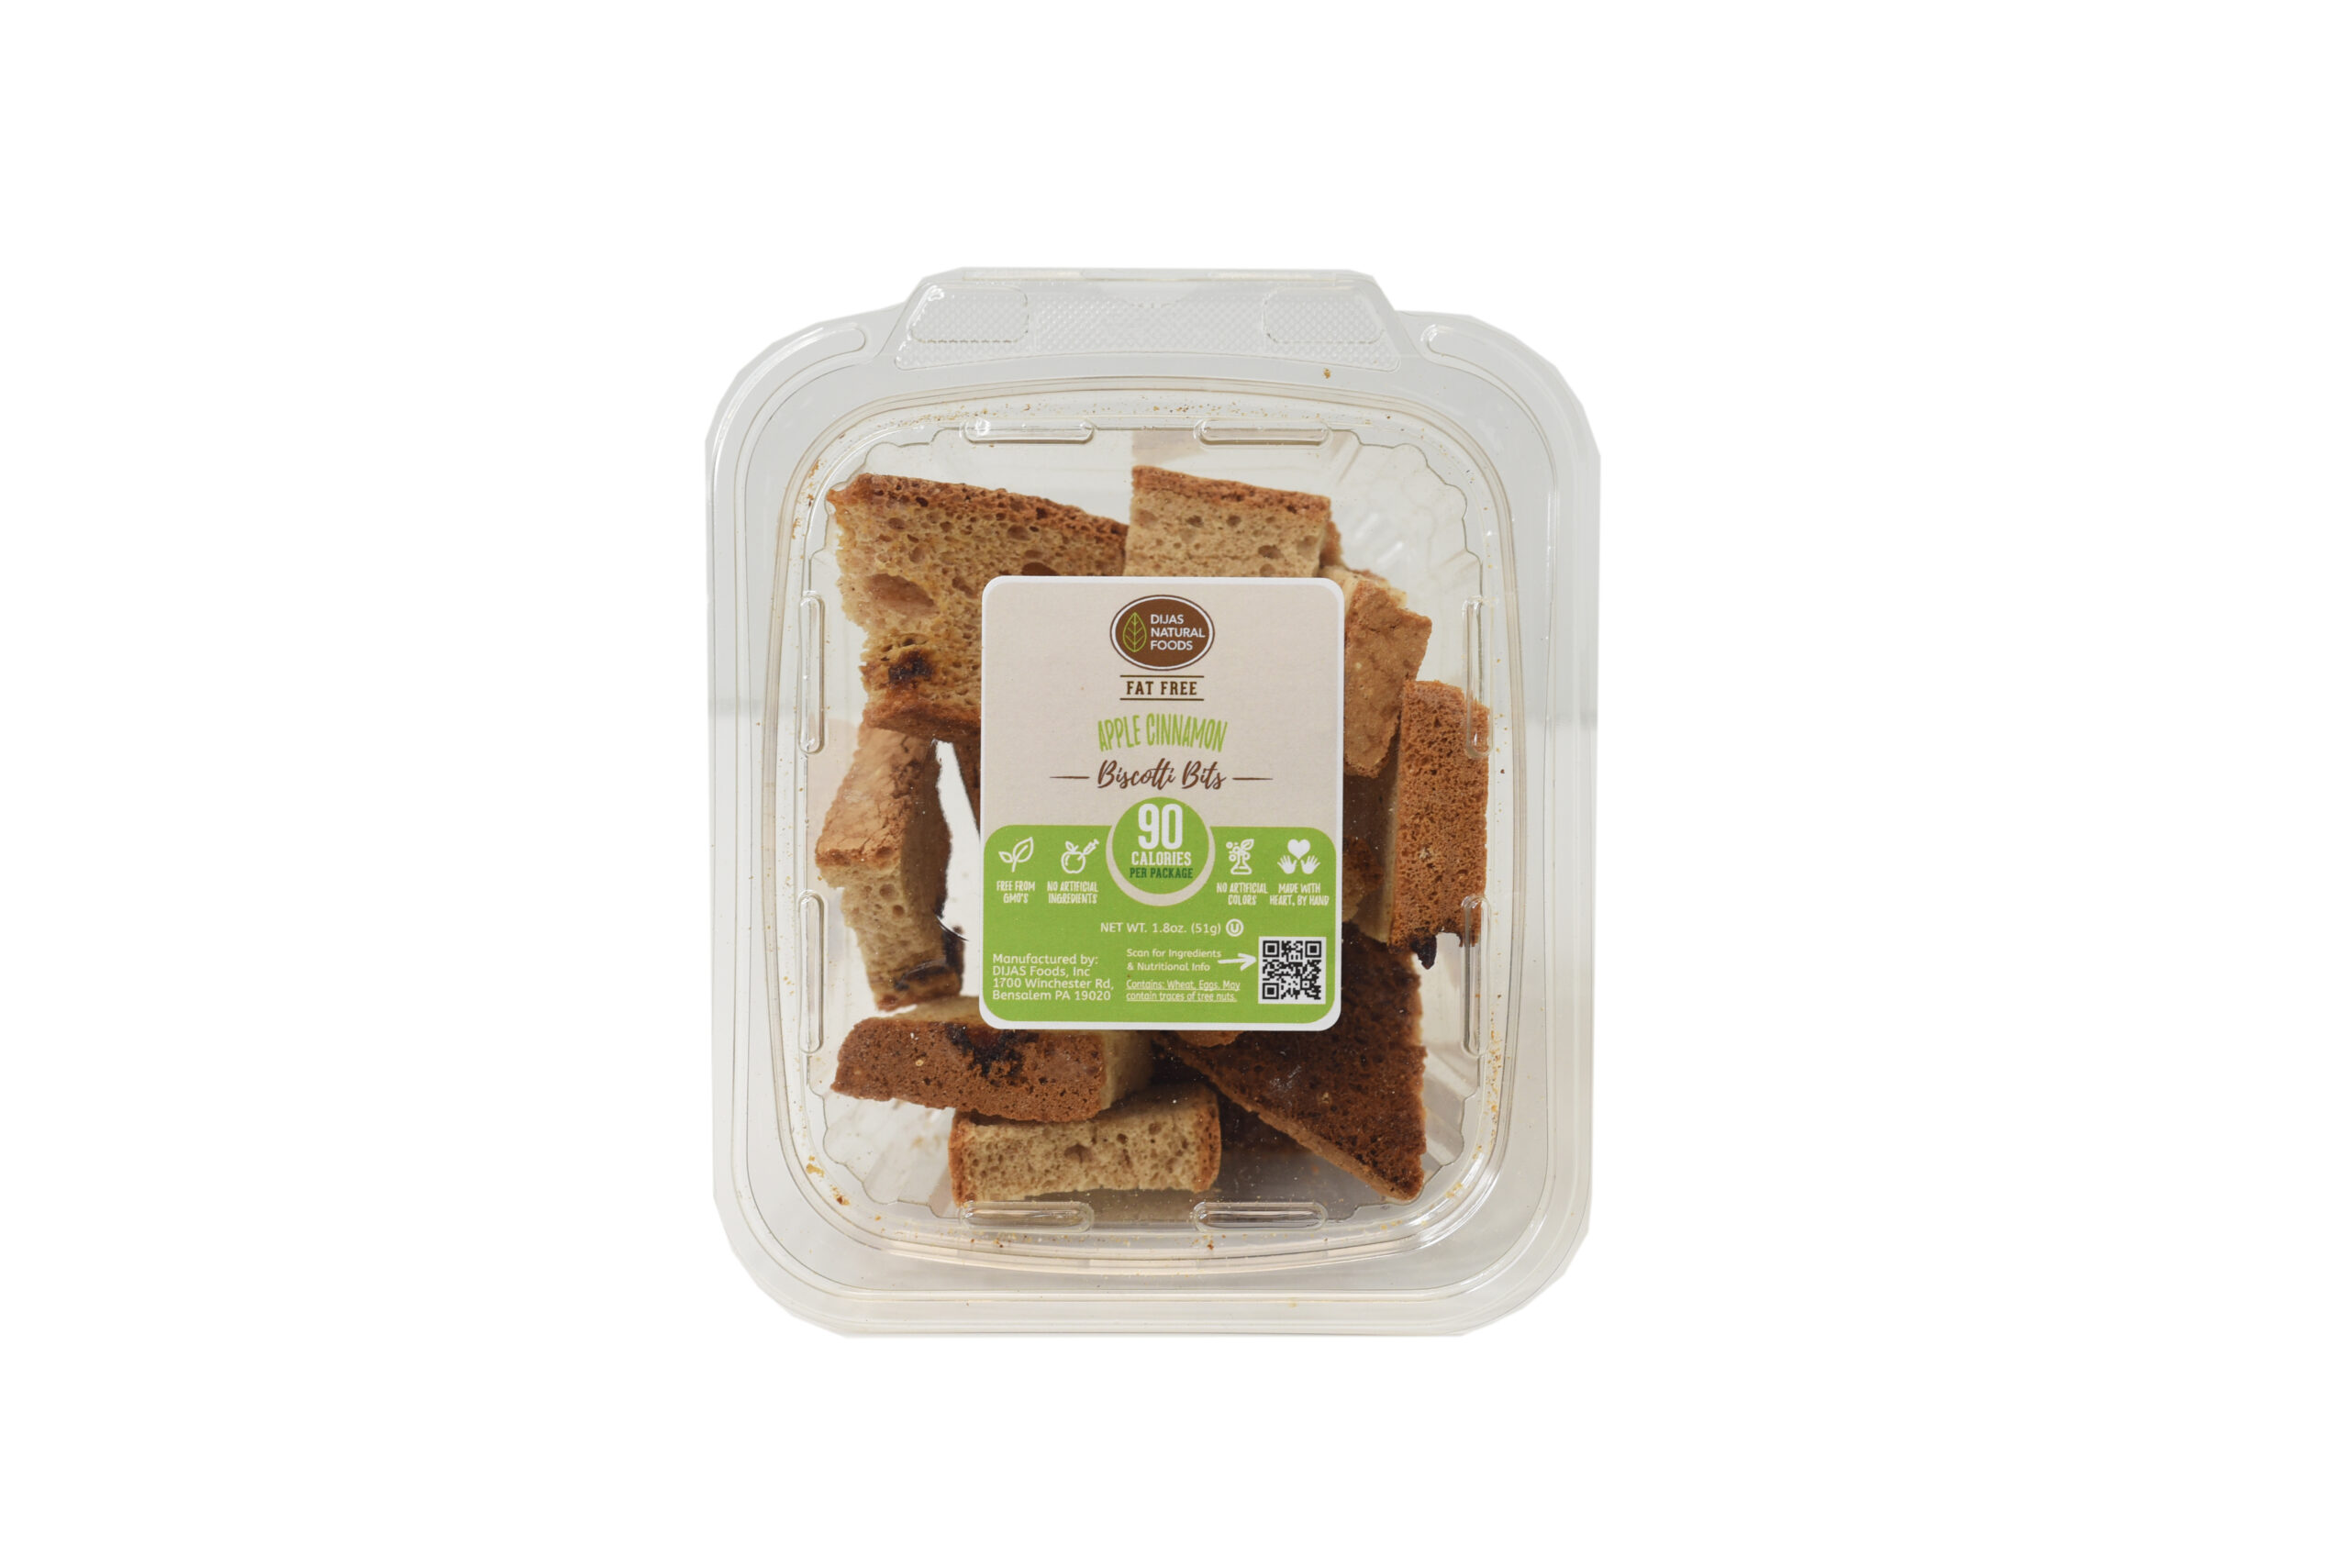 DIJAS Biscotti Bits are a healthy low calorie snack! We ship to the lower 48 states including Pennsylvania, New York, California, Florida, Colorado, Arizona, and Texas